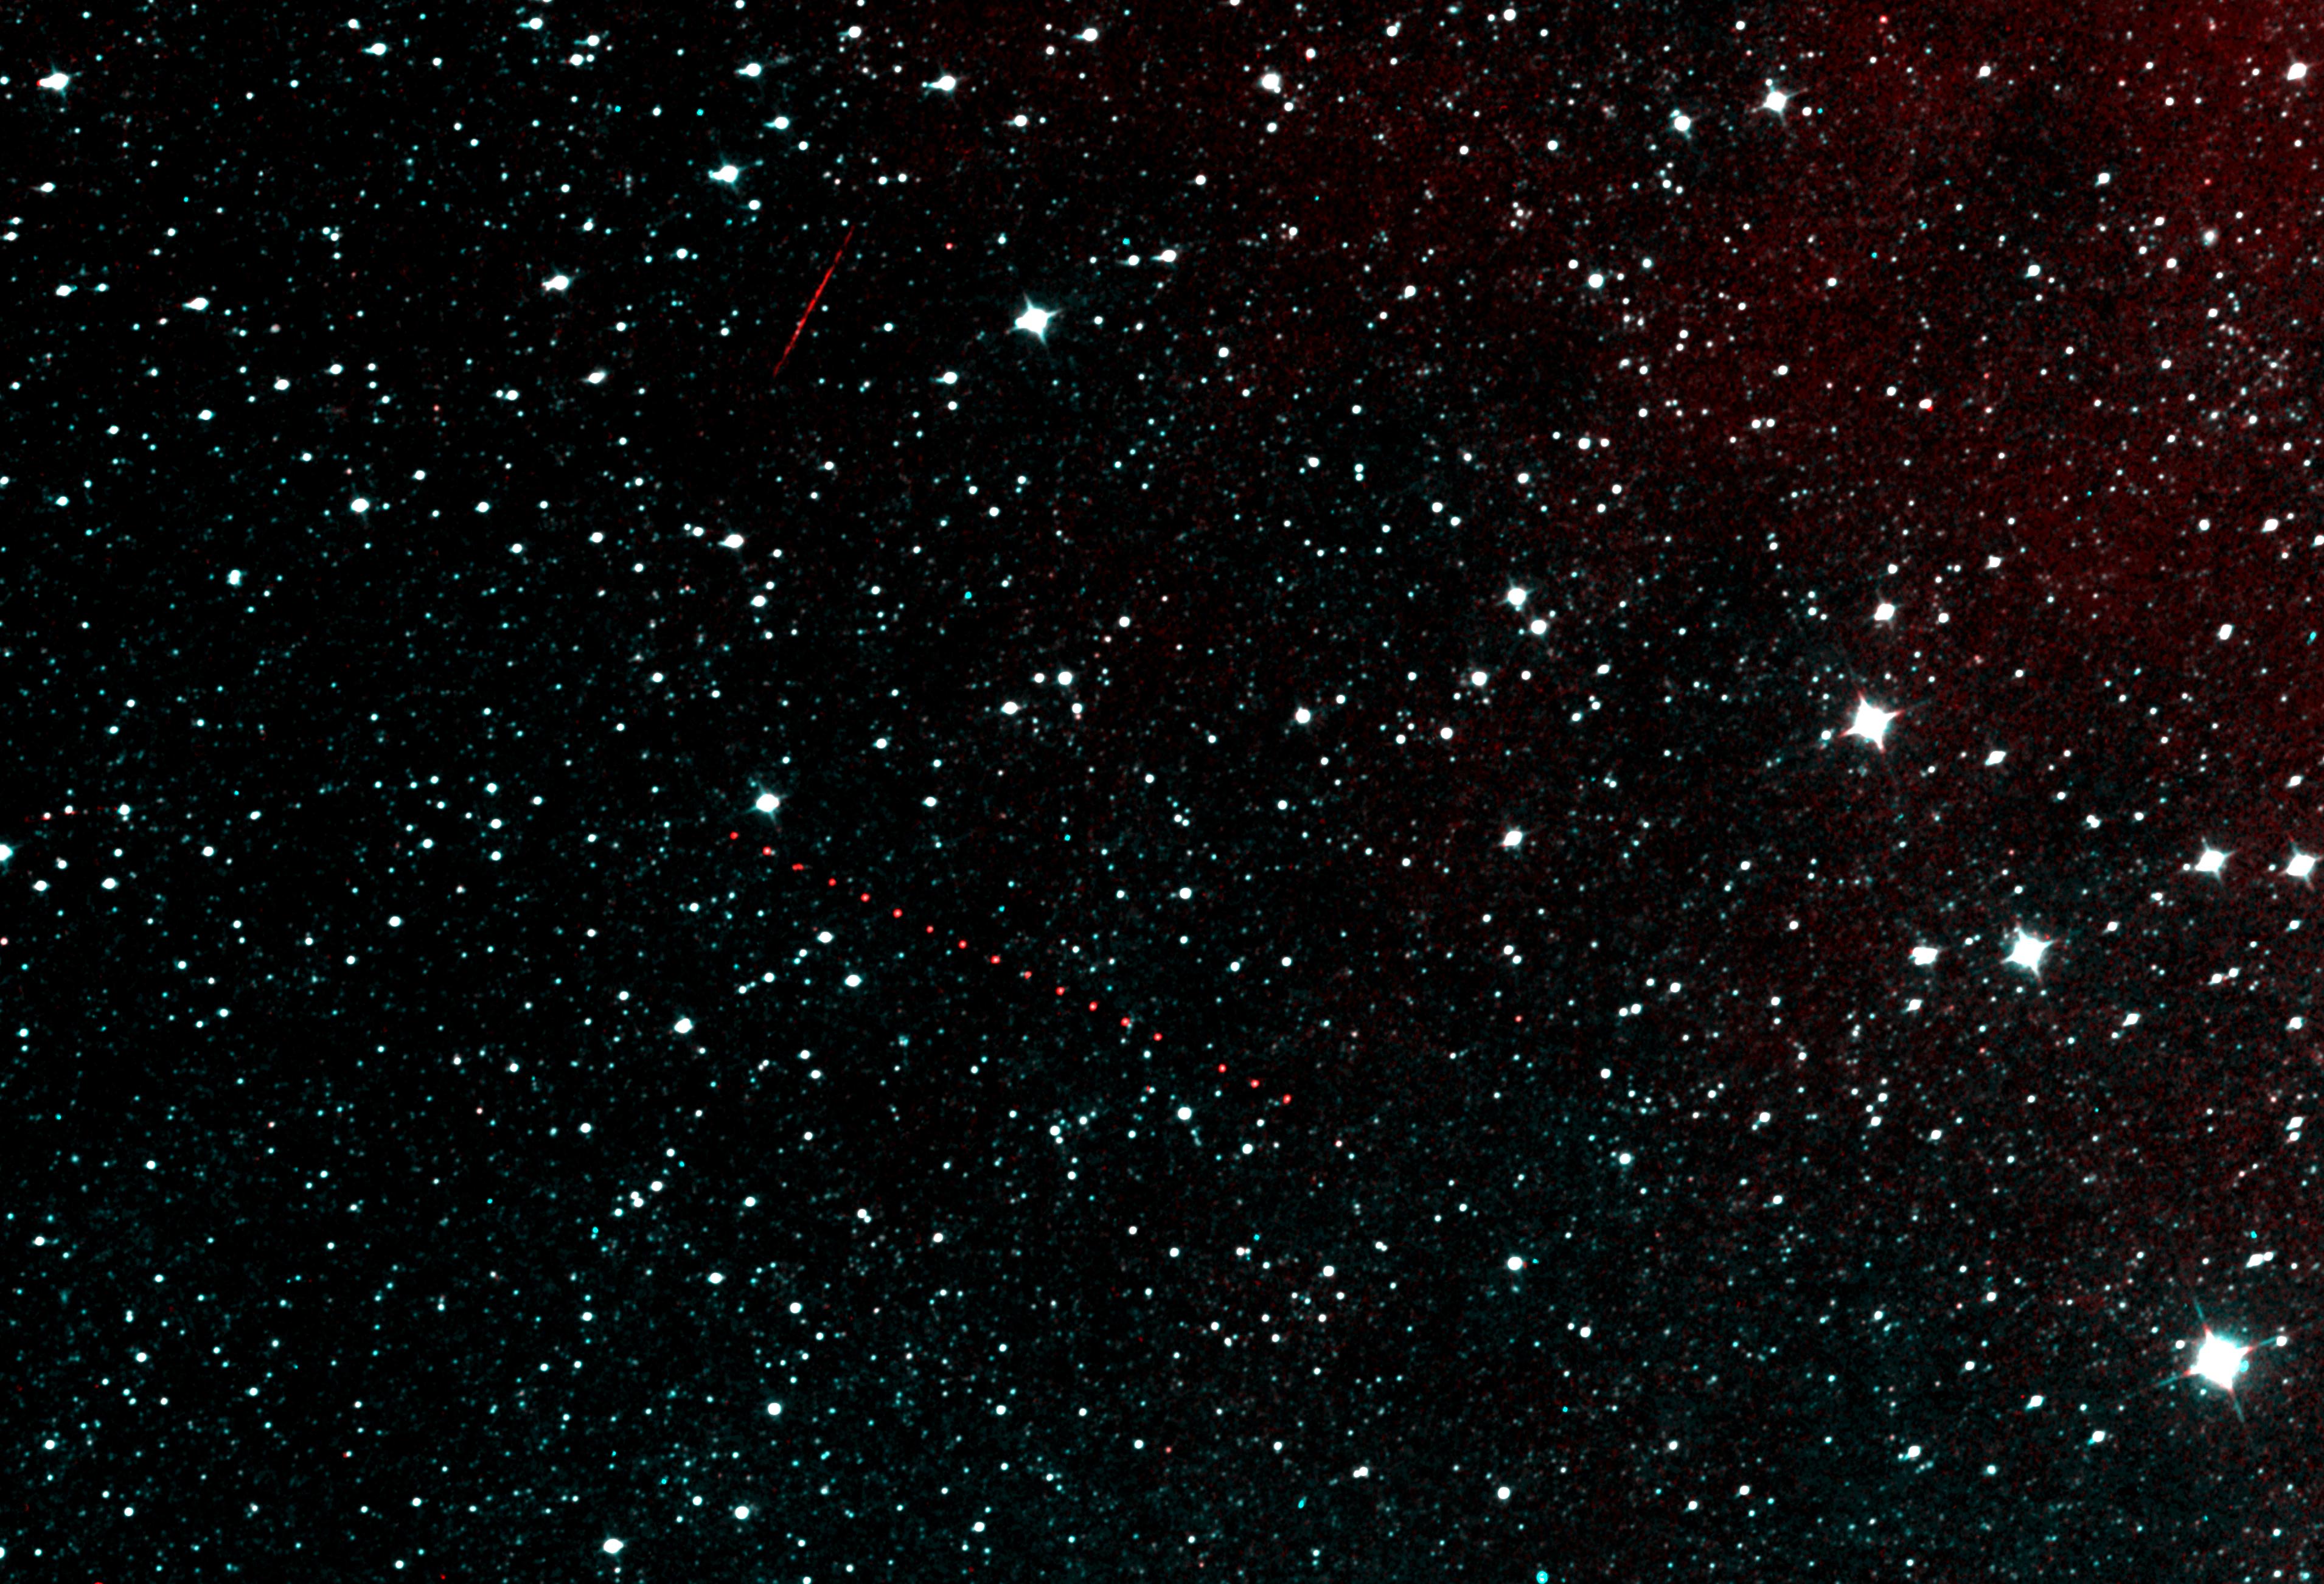 Space Image. NEOWISE's Next Light